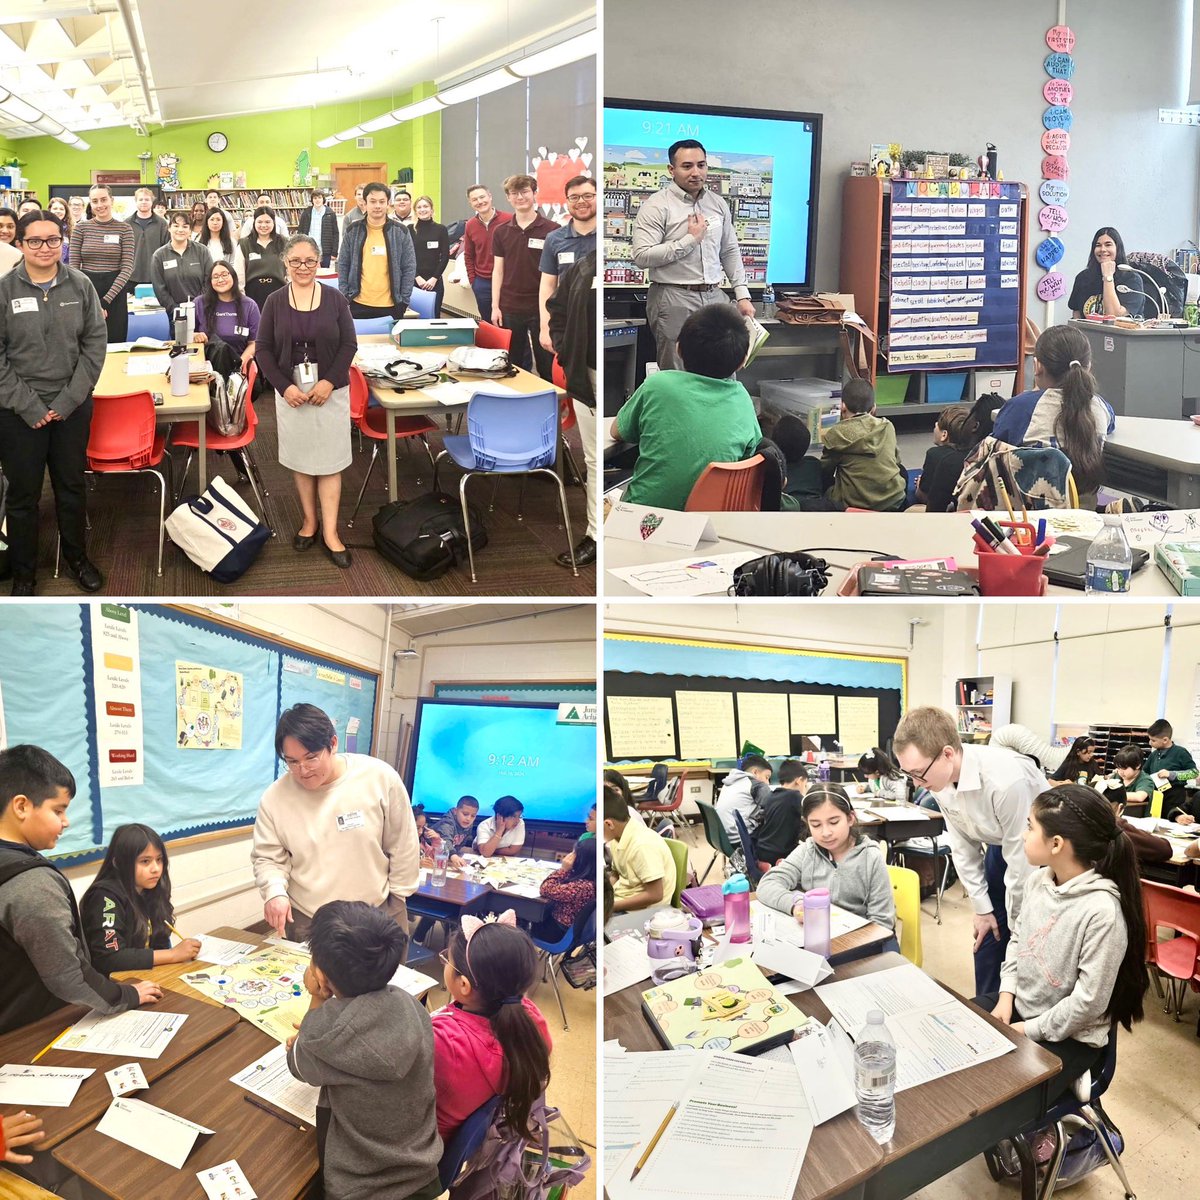 Thank you @JA_USA @for making a difference in our school by teaching financial literacy to our eagles. Your dedication is inspiring the next generation to be financially empowered. Together, we can create a brighter future for all! @baverticalteam @CounselingDISD